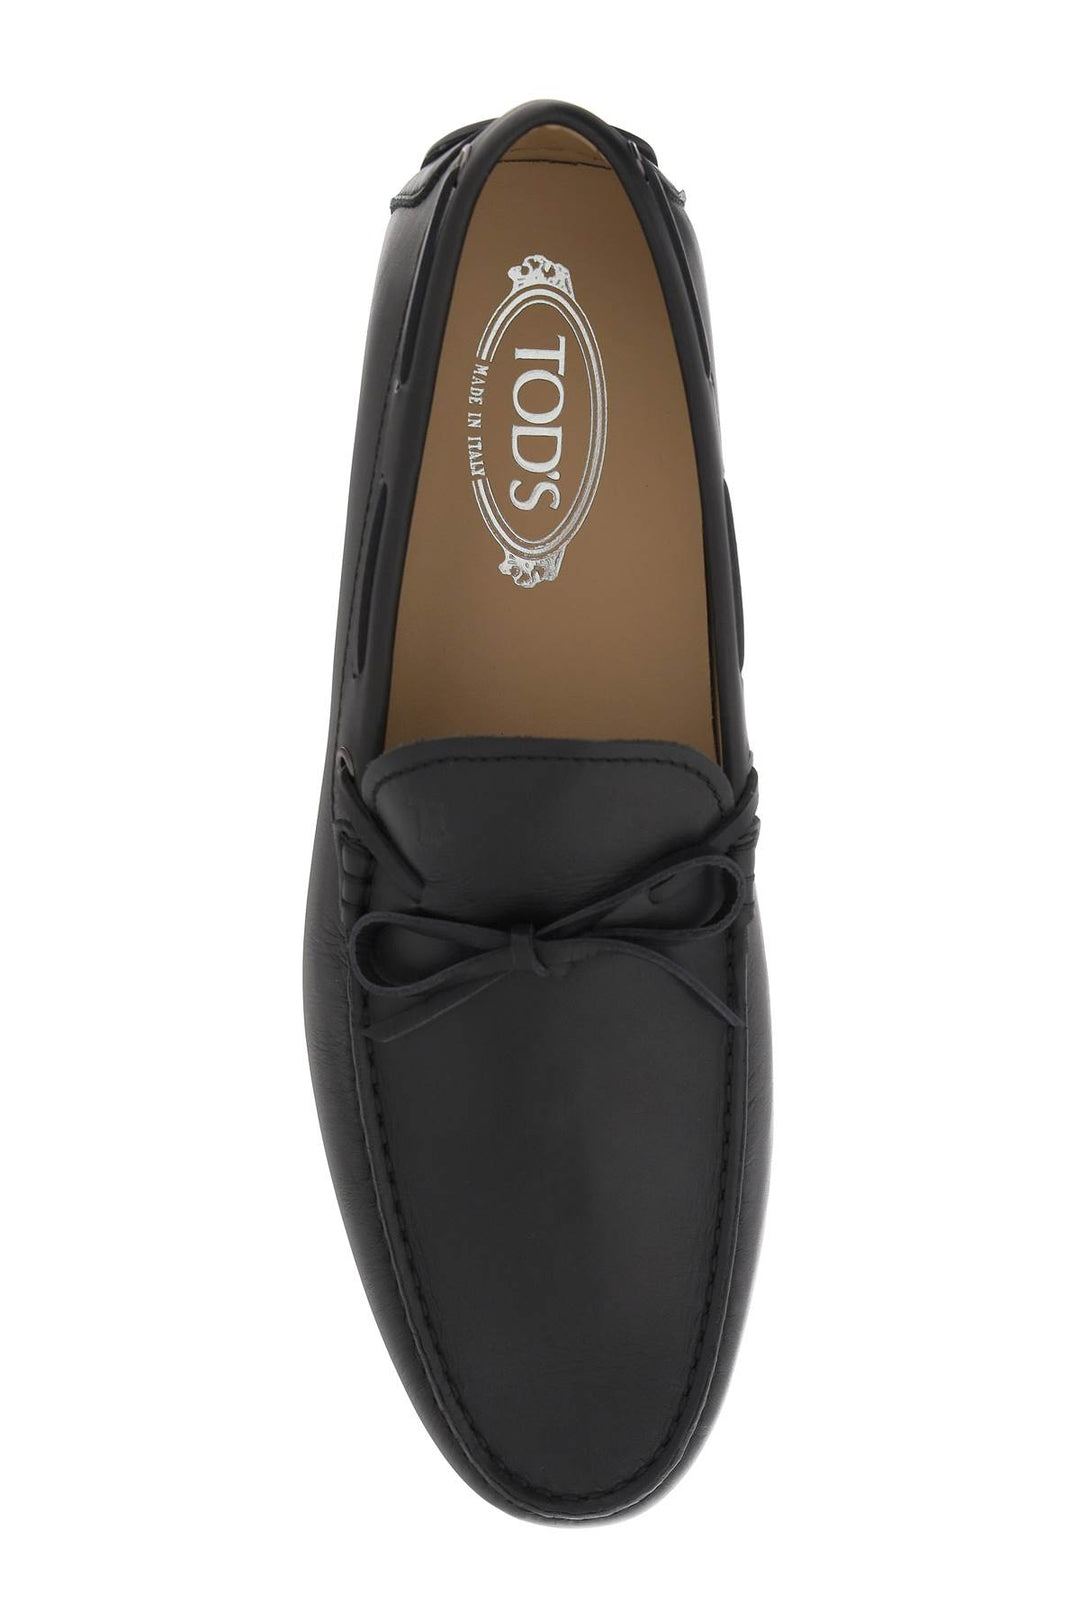 Tod's 'City Gommino' Loafers   Black